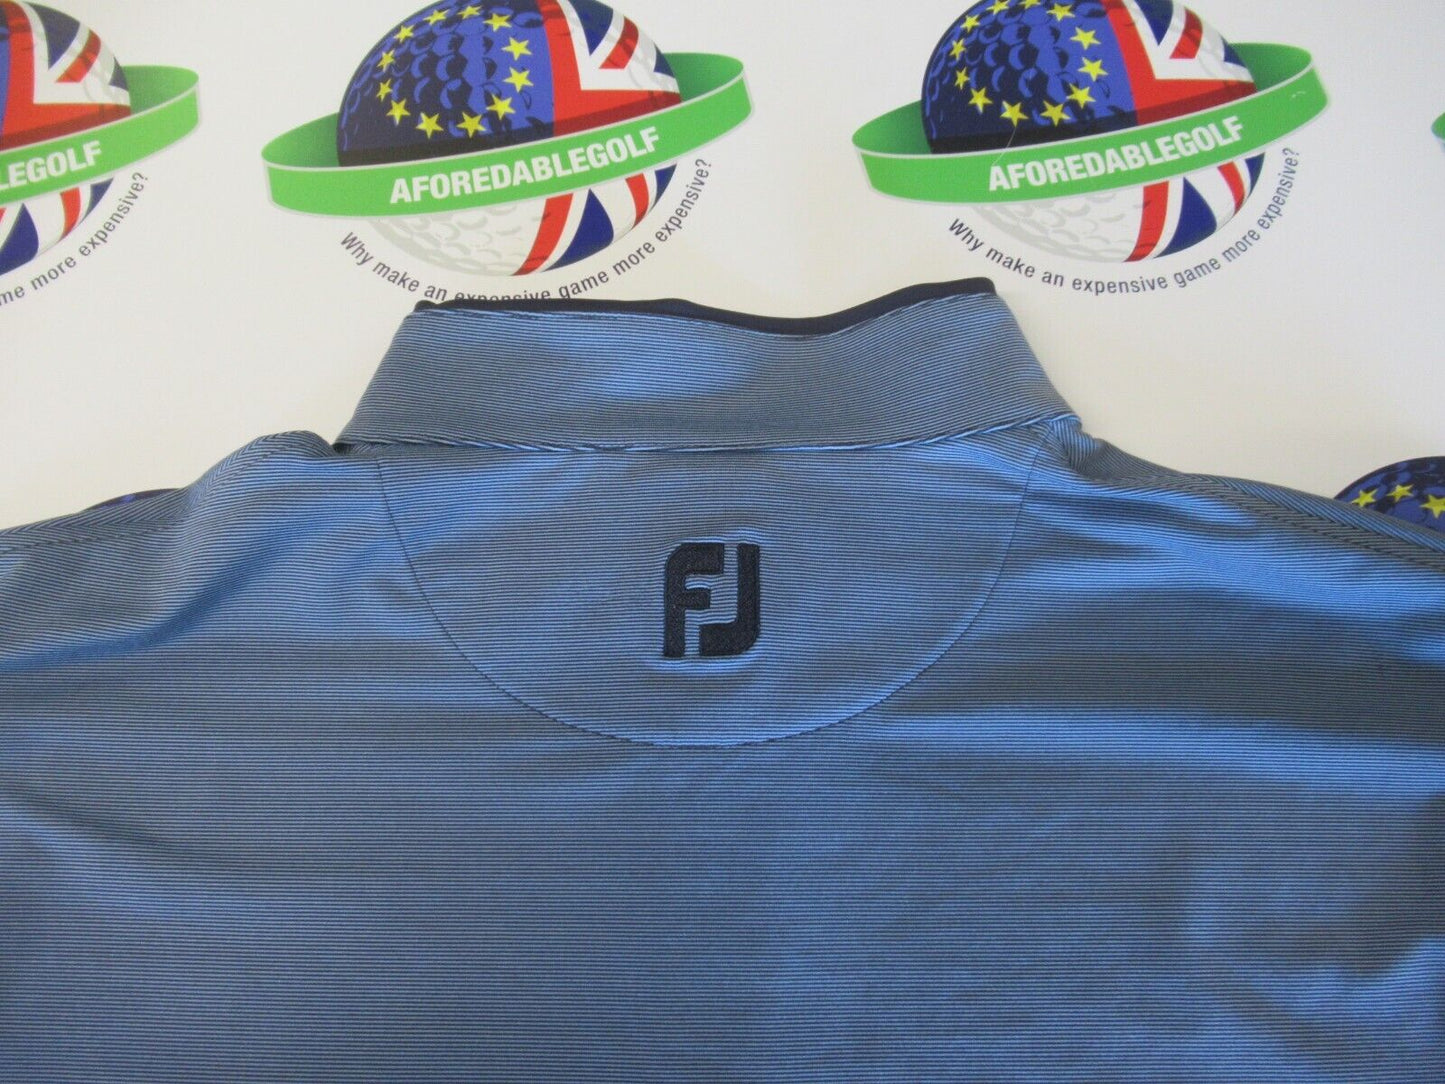 footjoy eu multistripe chill out 1/2 zip pullover navy/lagoon uk size xl